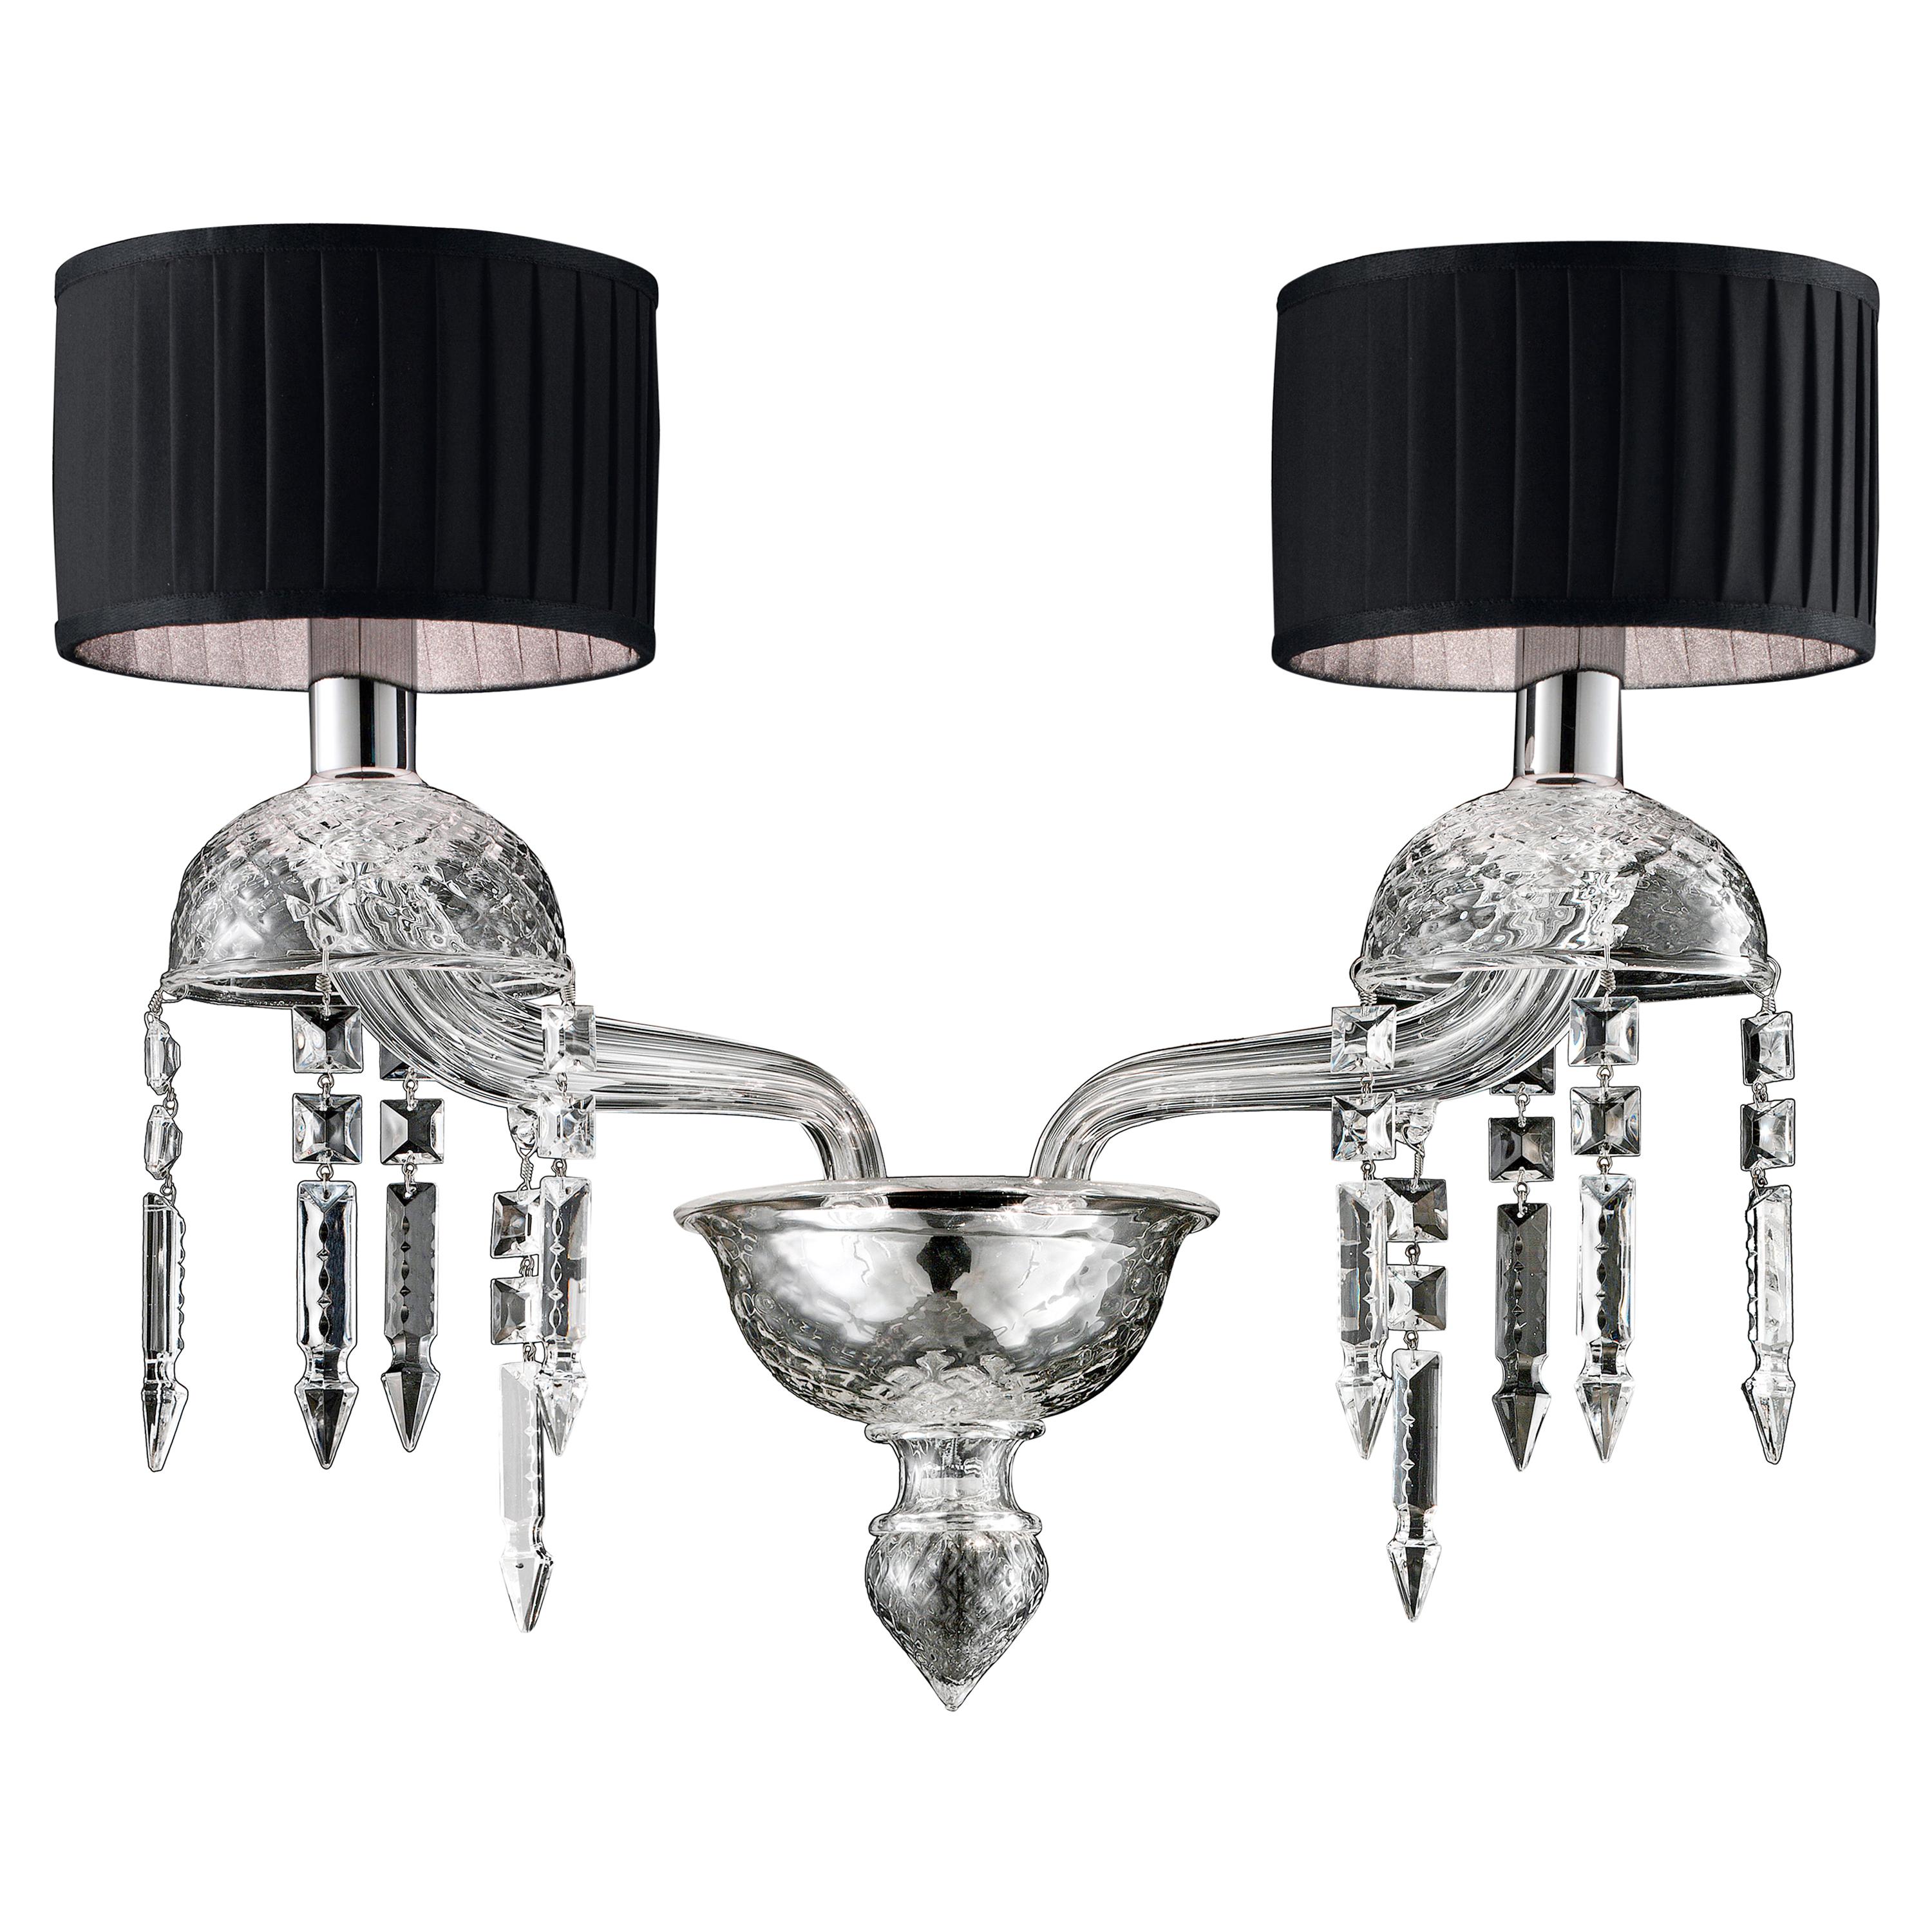 Clear (Crystal_CC) Premiere Dame 5696 02 Wall Sconce in Glass with Black Shade, by Barovier & Toso